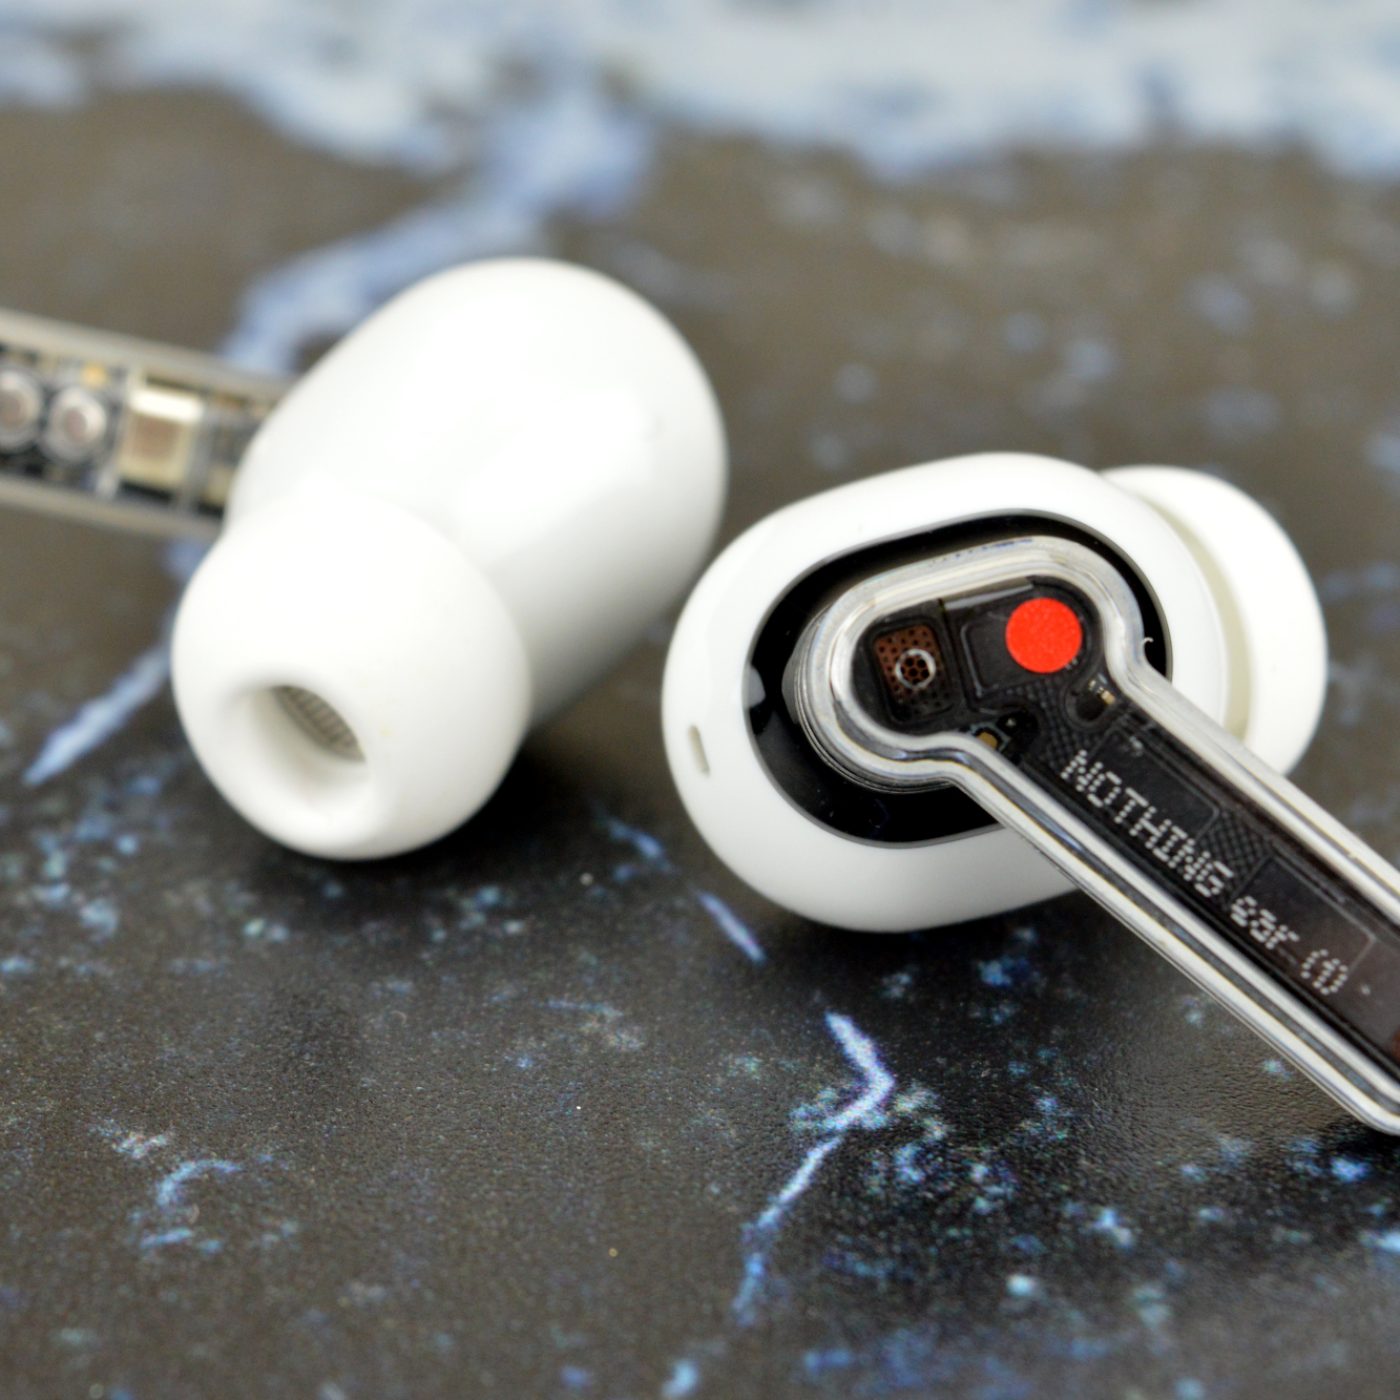 Nothing Ear (1) Wireless Earbuds Review: The Best For The Price